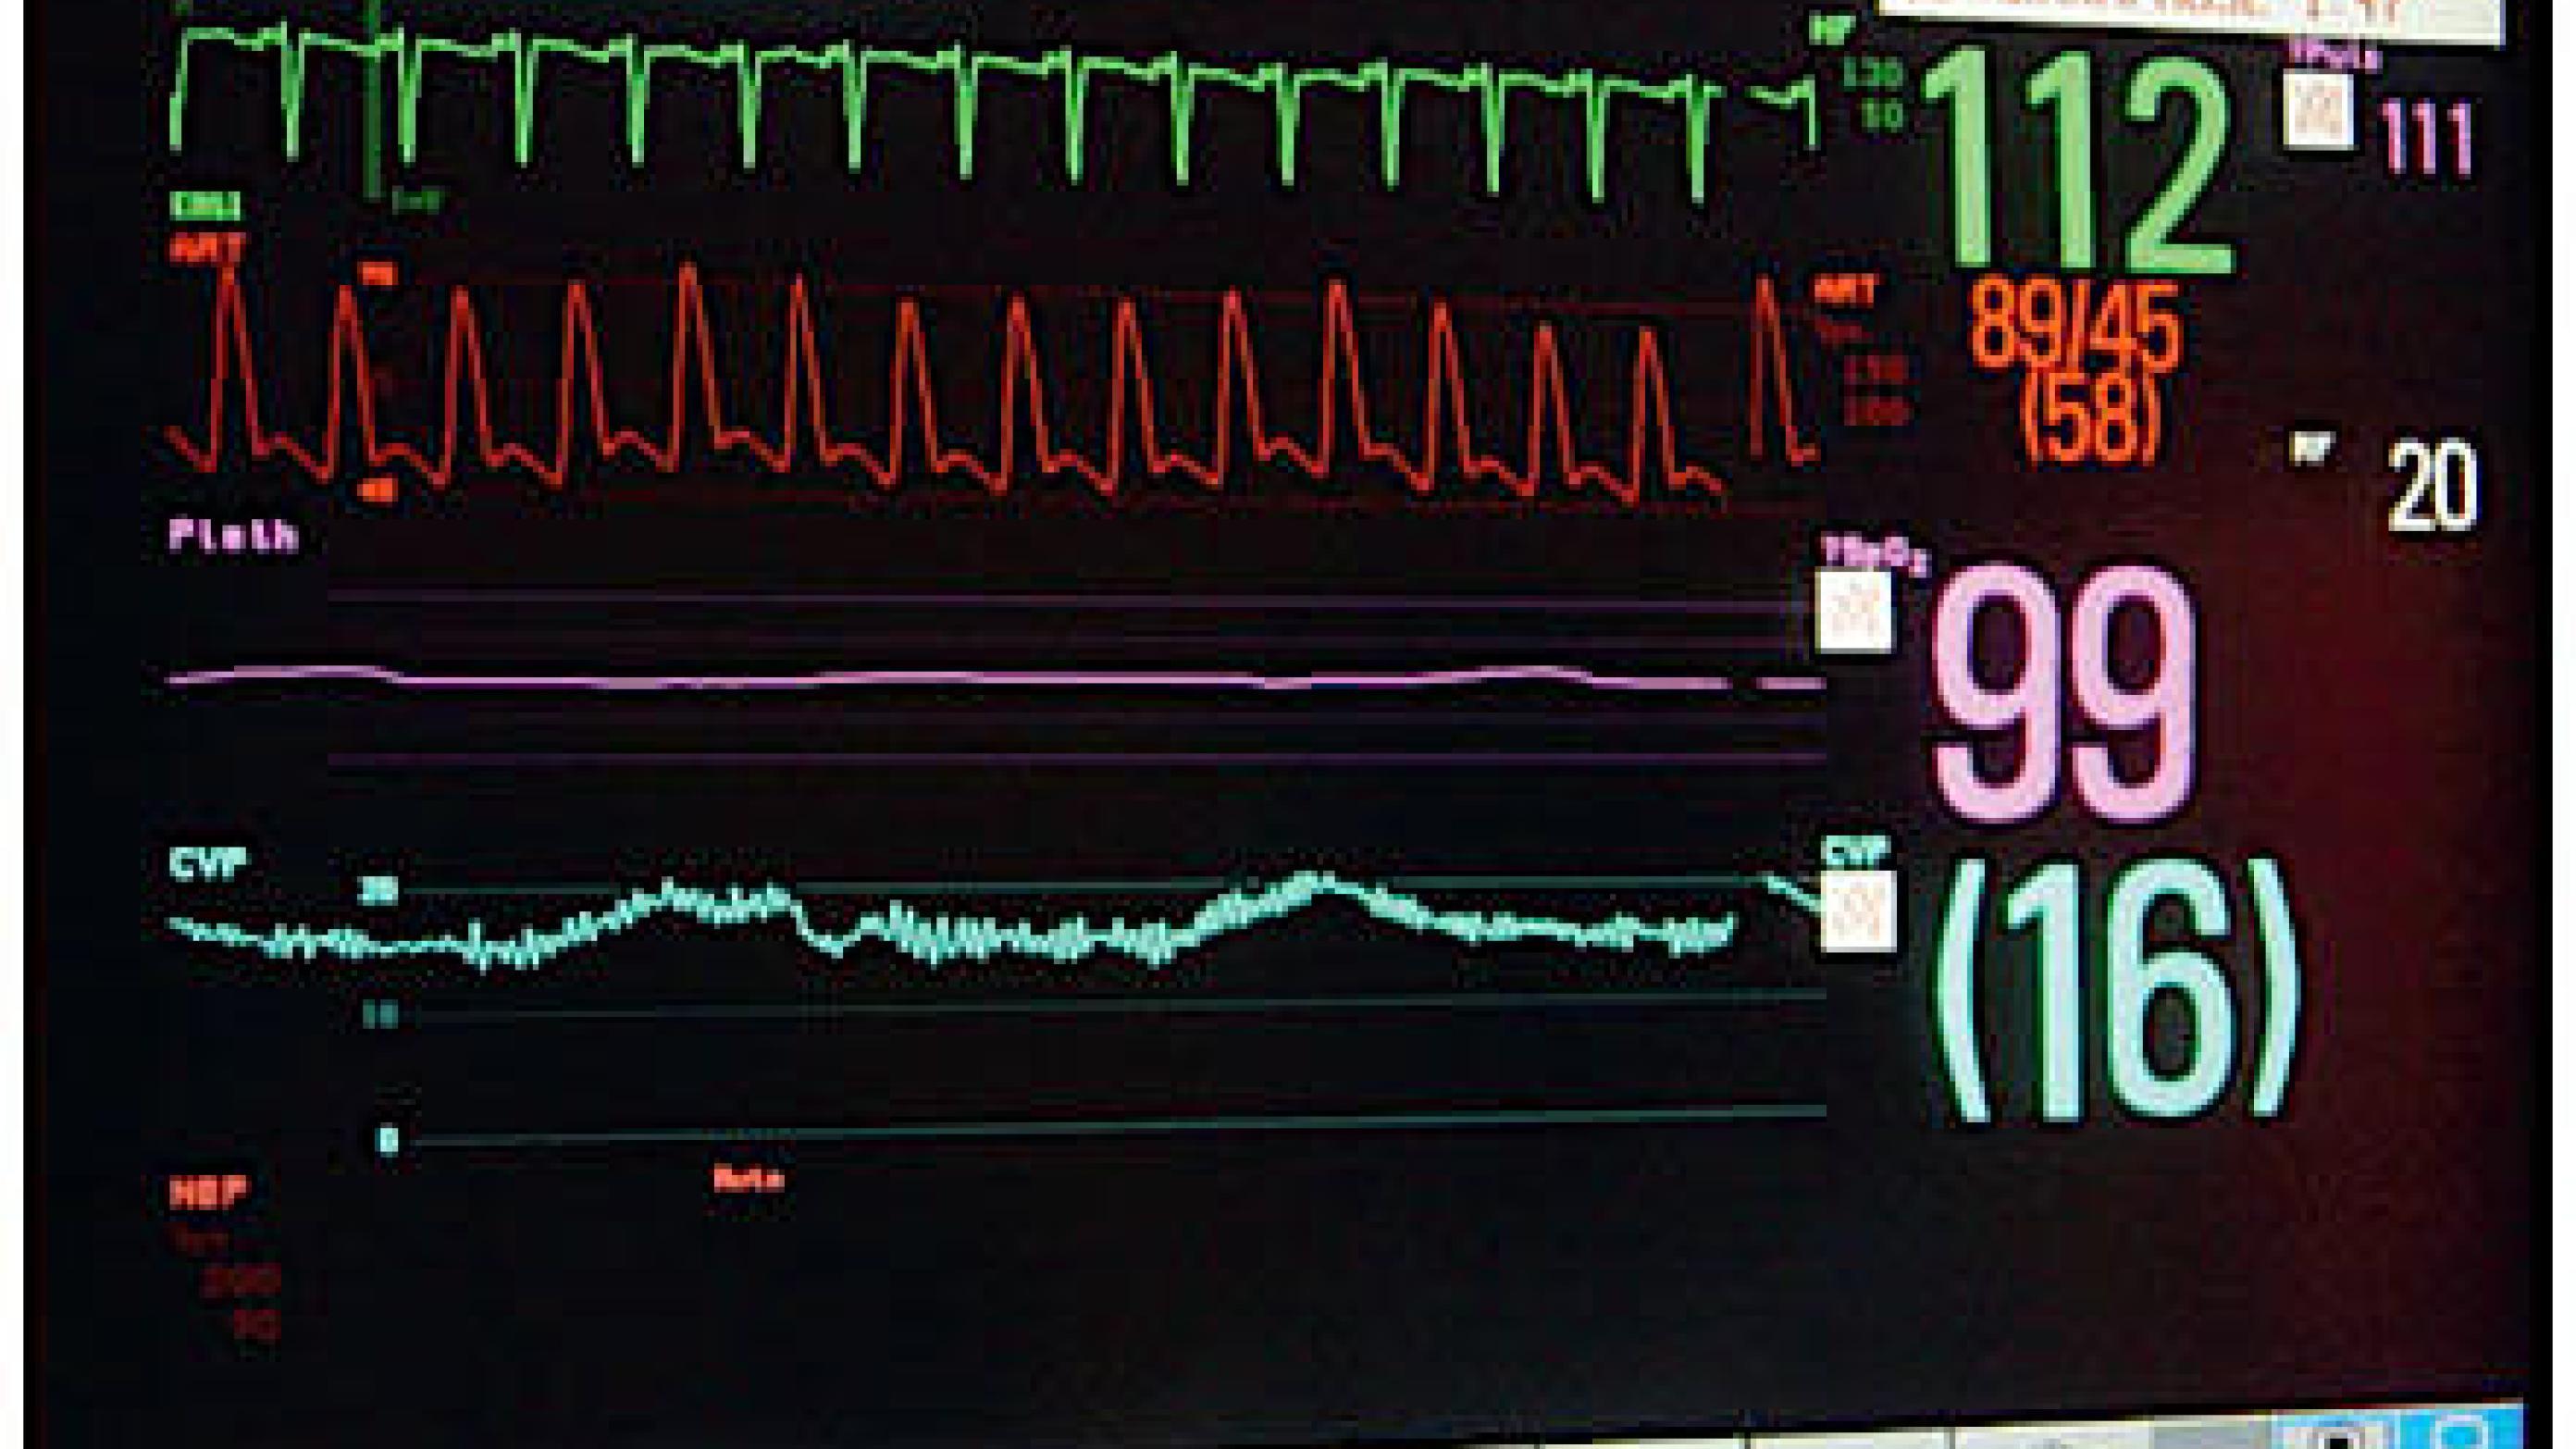 Haemodynamic monitoring of an intensive care unit patient.